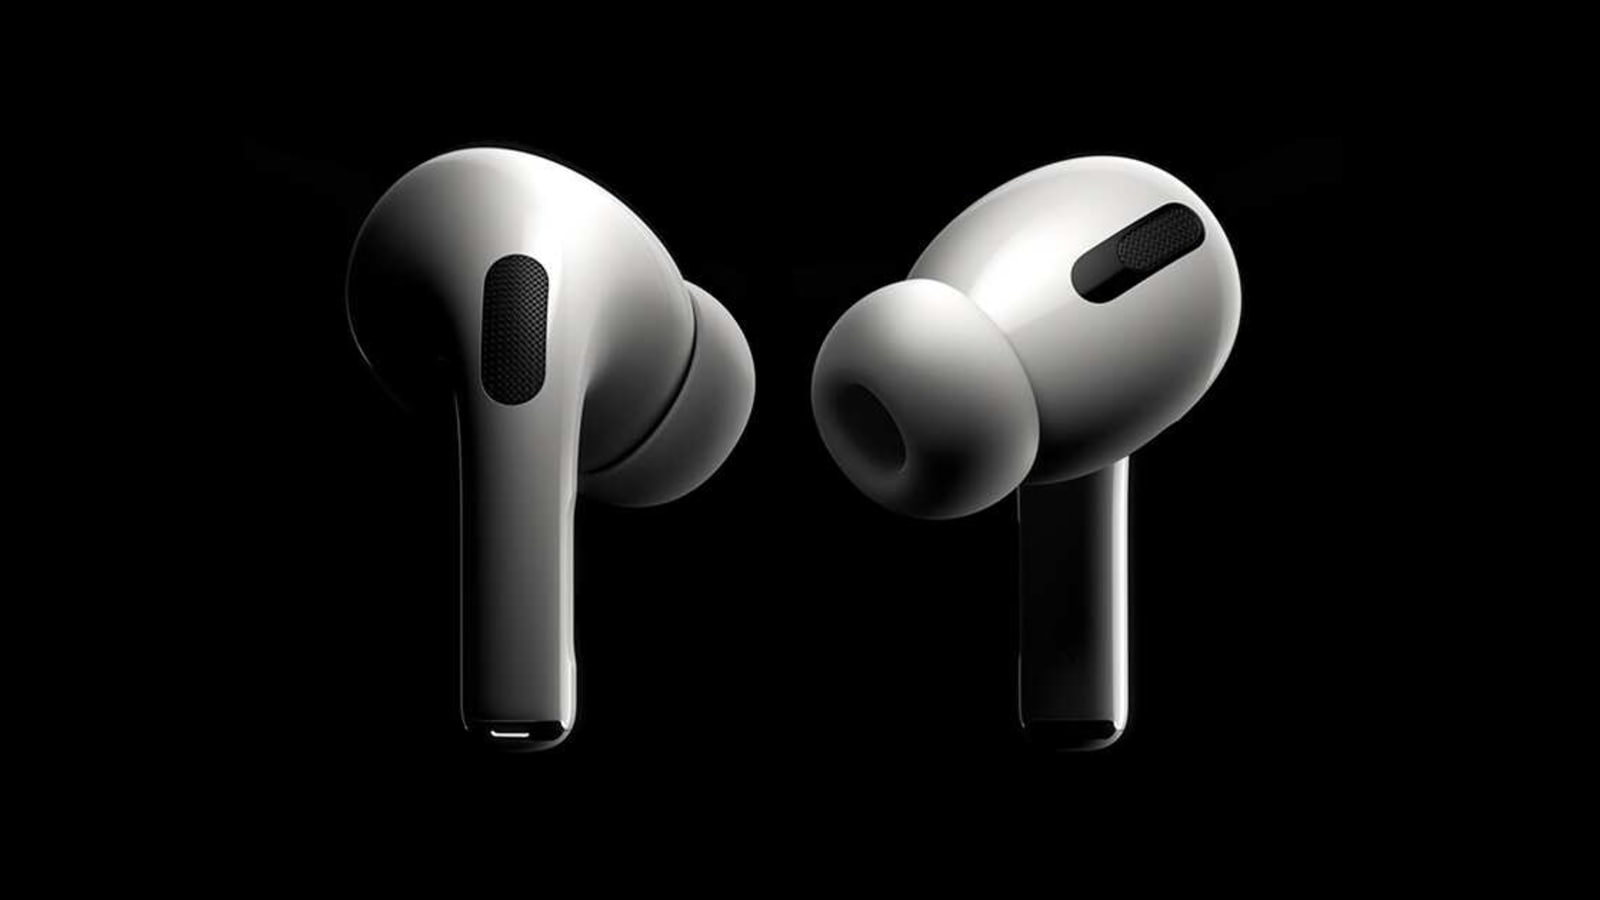 Apple's AirPods Pro 2 will come in two sizes Wearables News